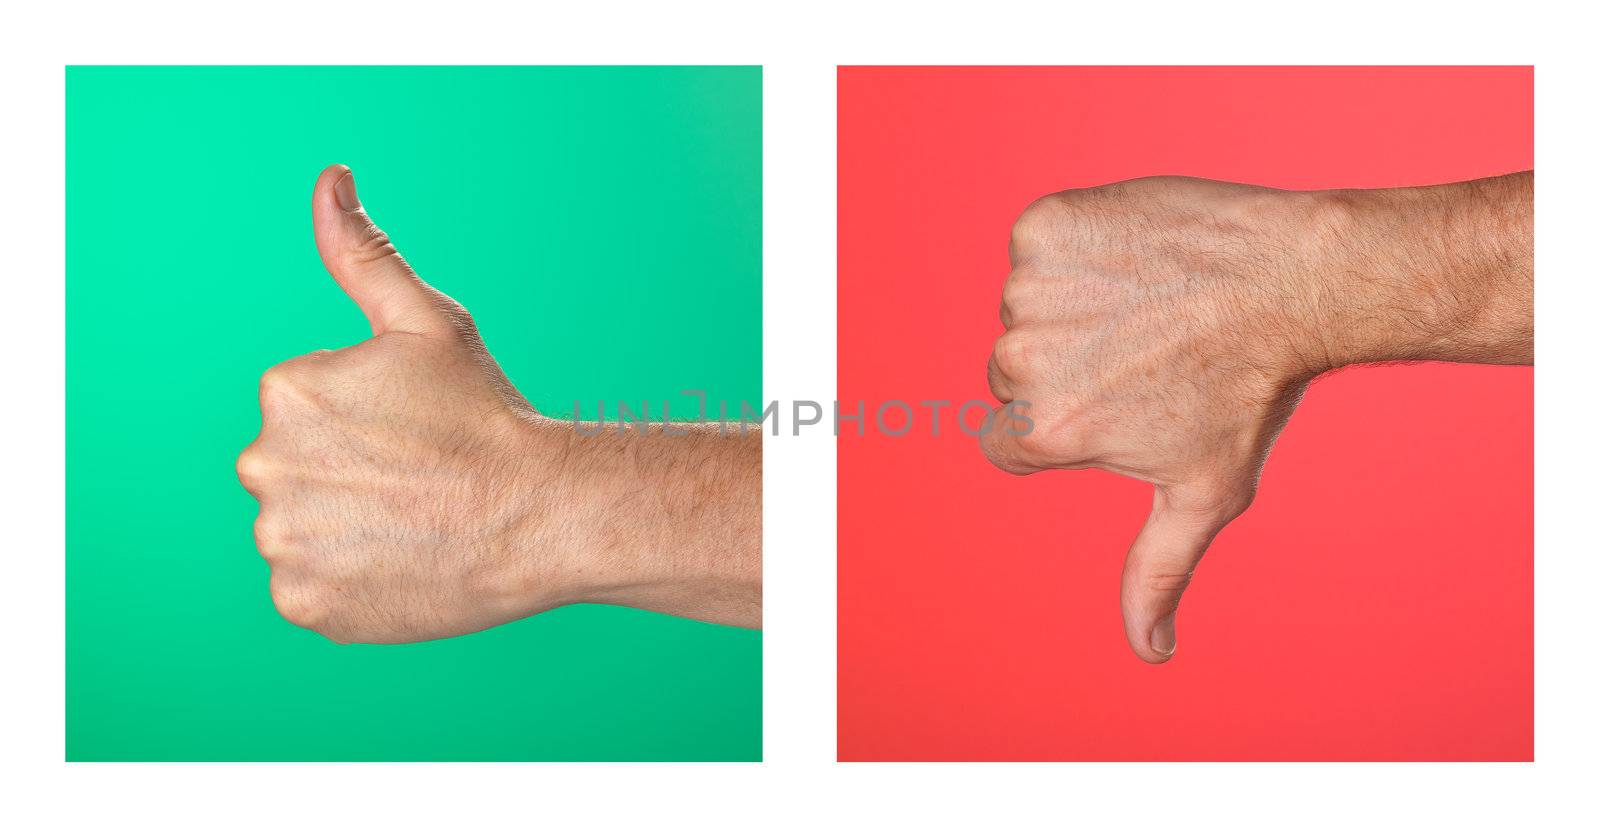 Pair of Thumbs up and Thumbs Down Signs on Green and Red Background by scheriton